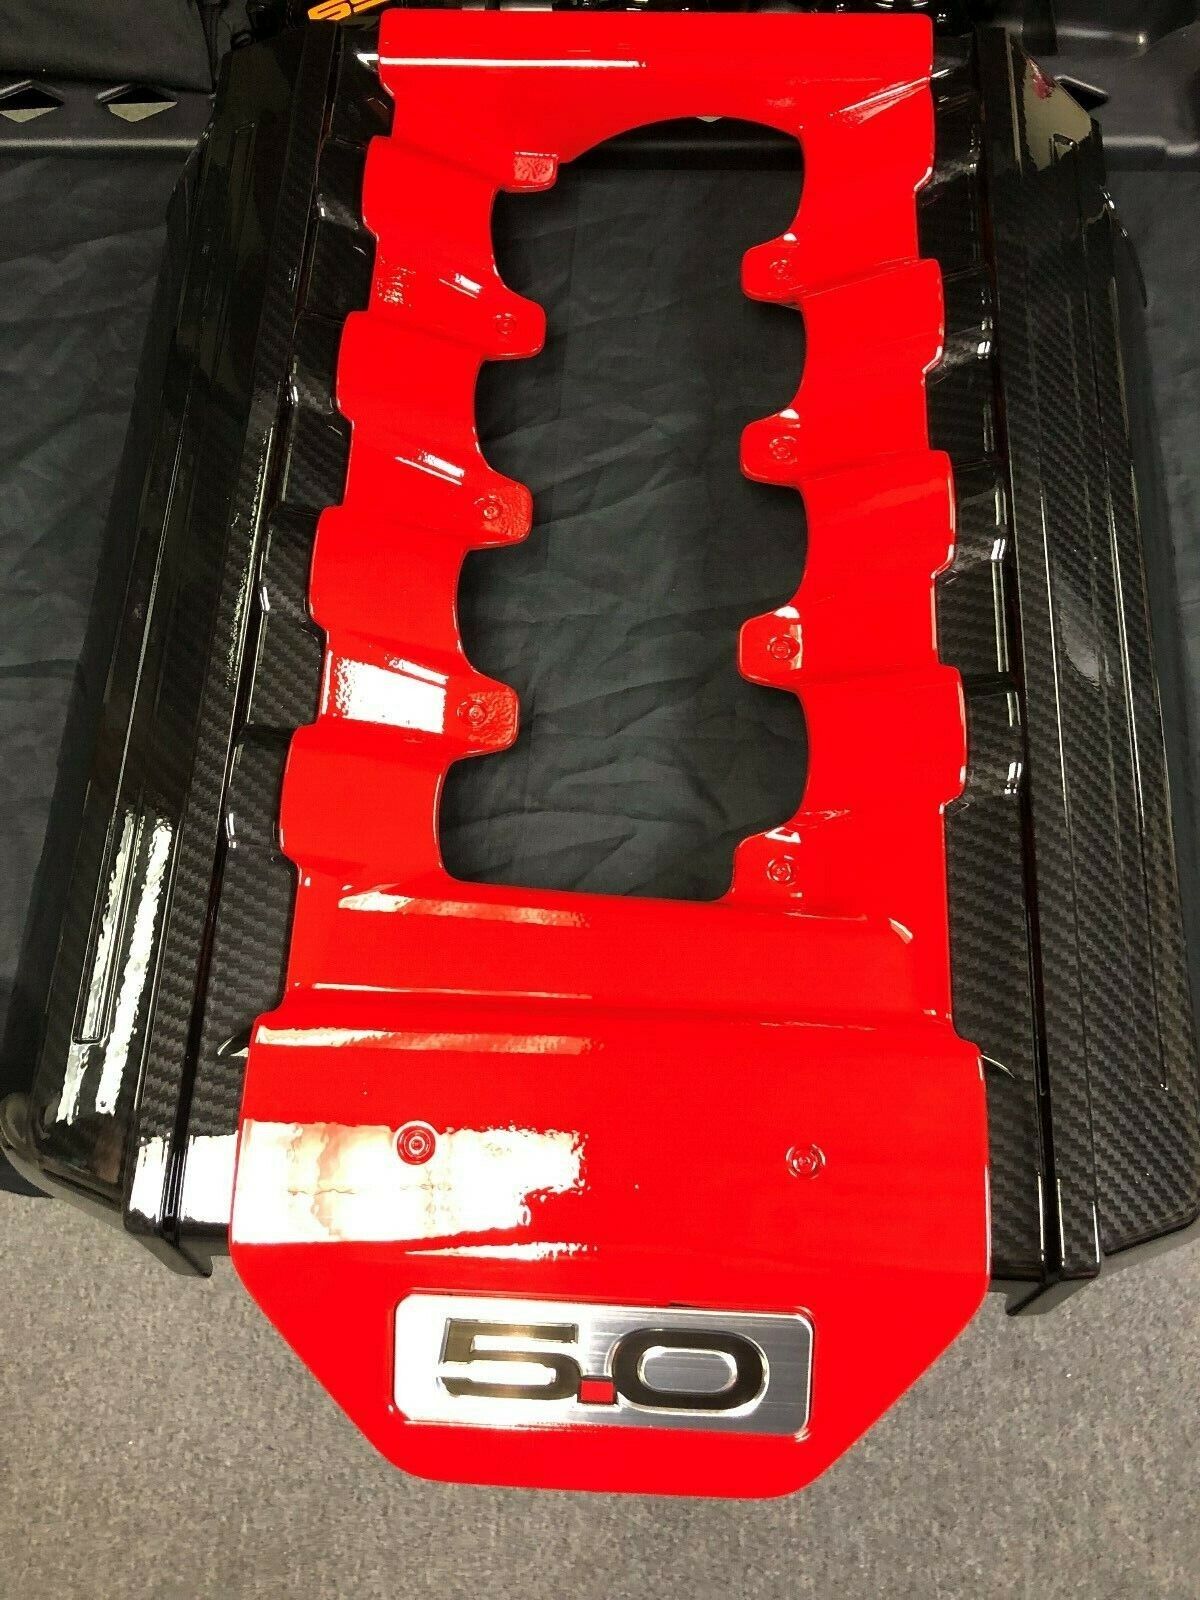 Ford Mustang GT Painted Race Red Center And Black Sides. Engine Cover 5.0